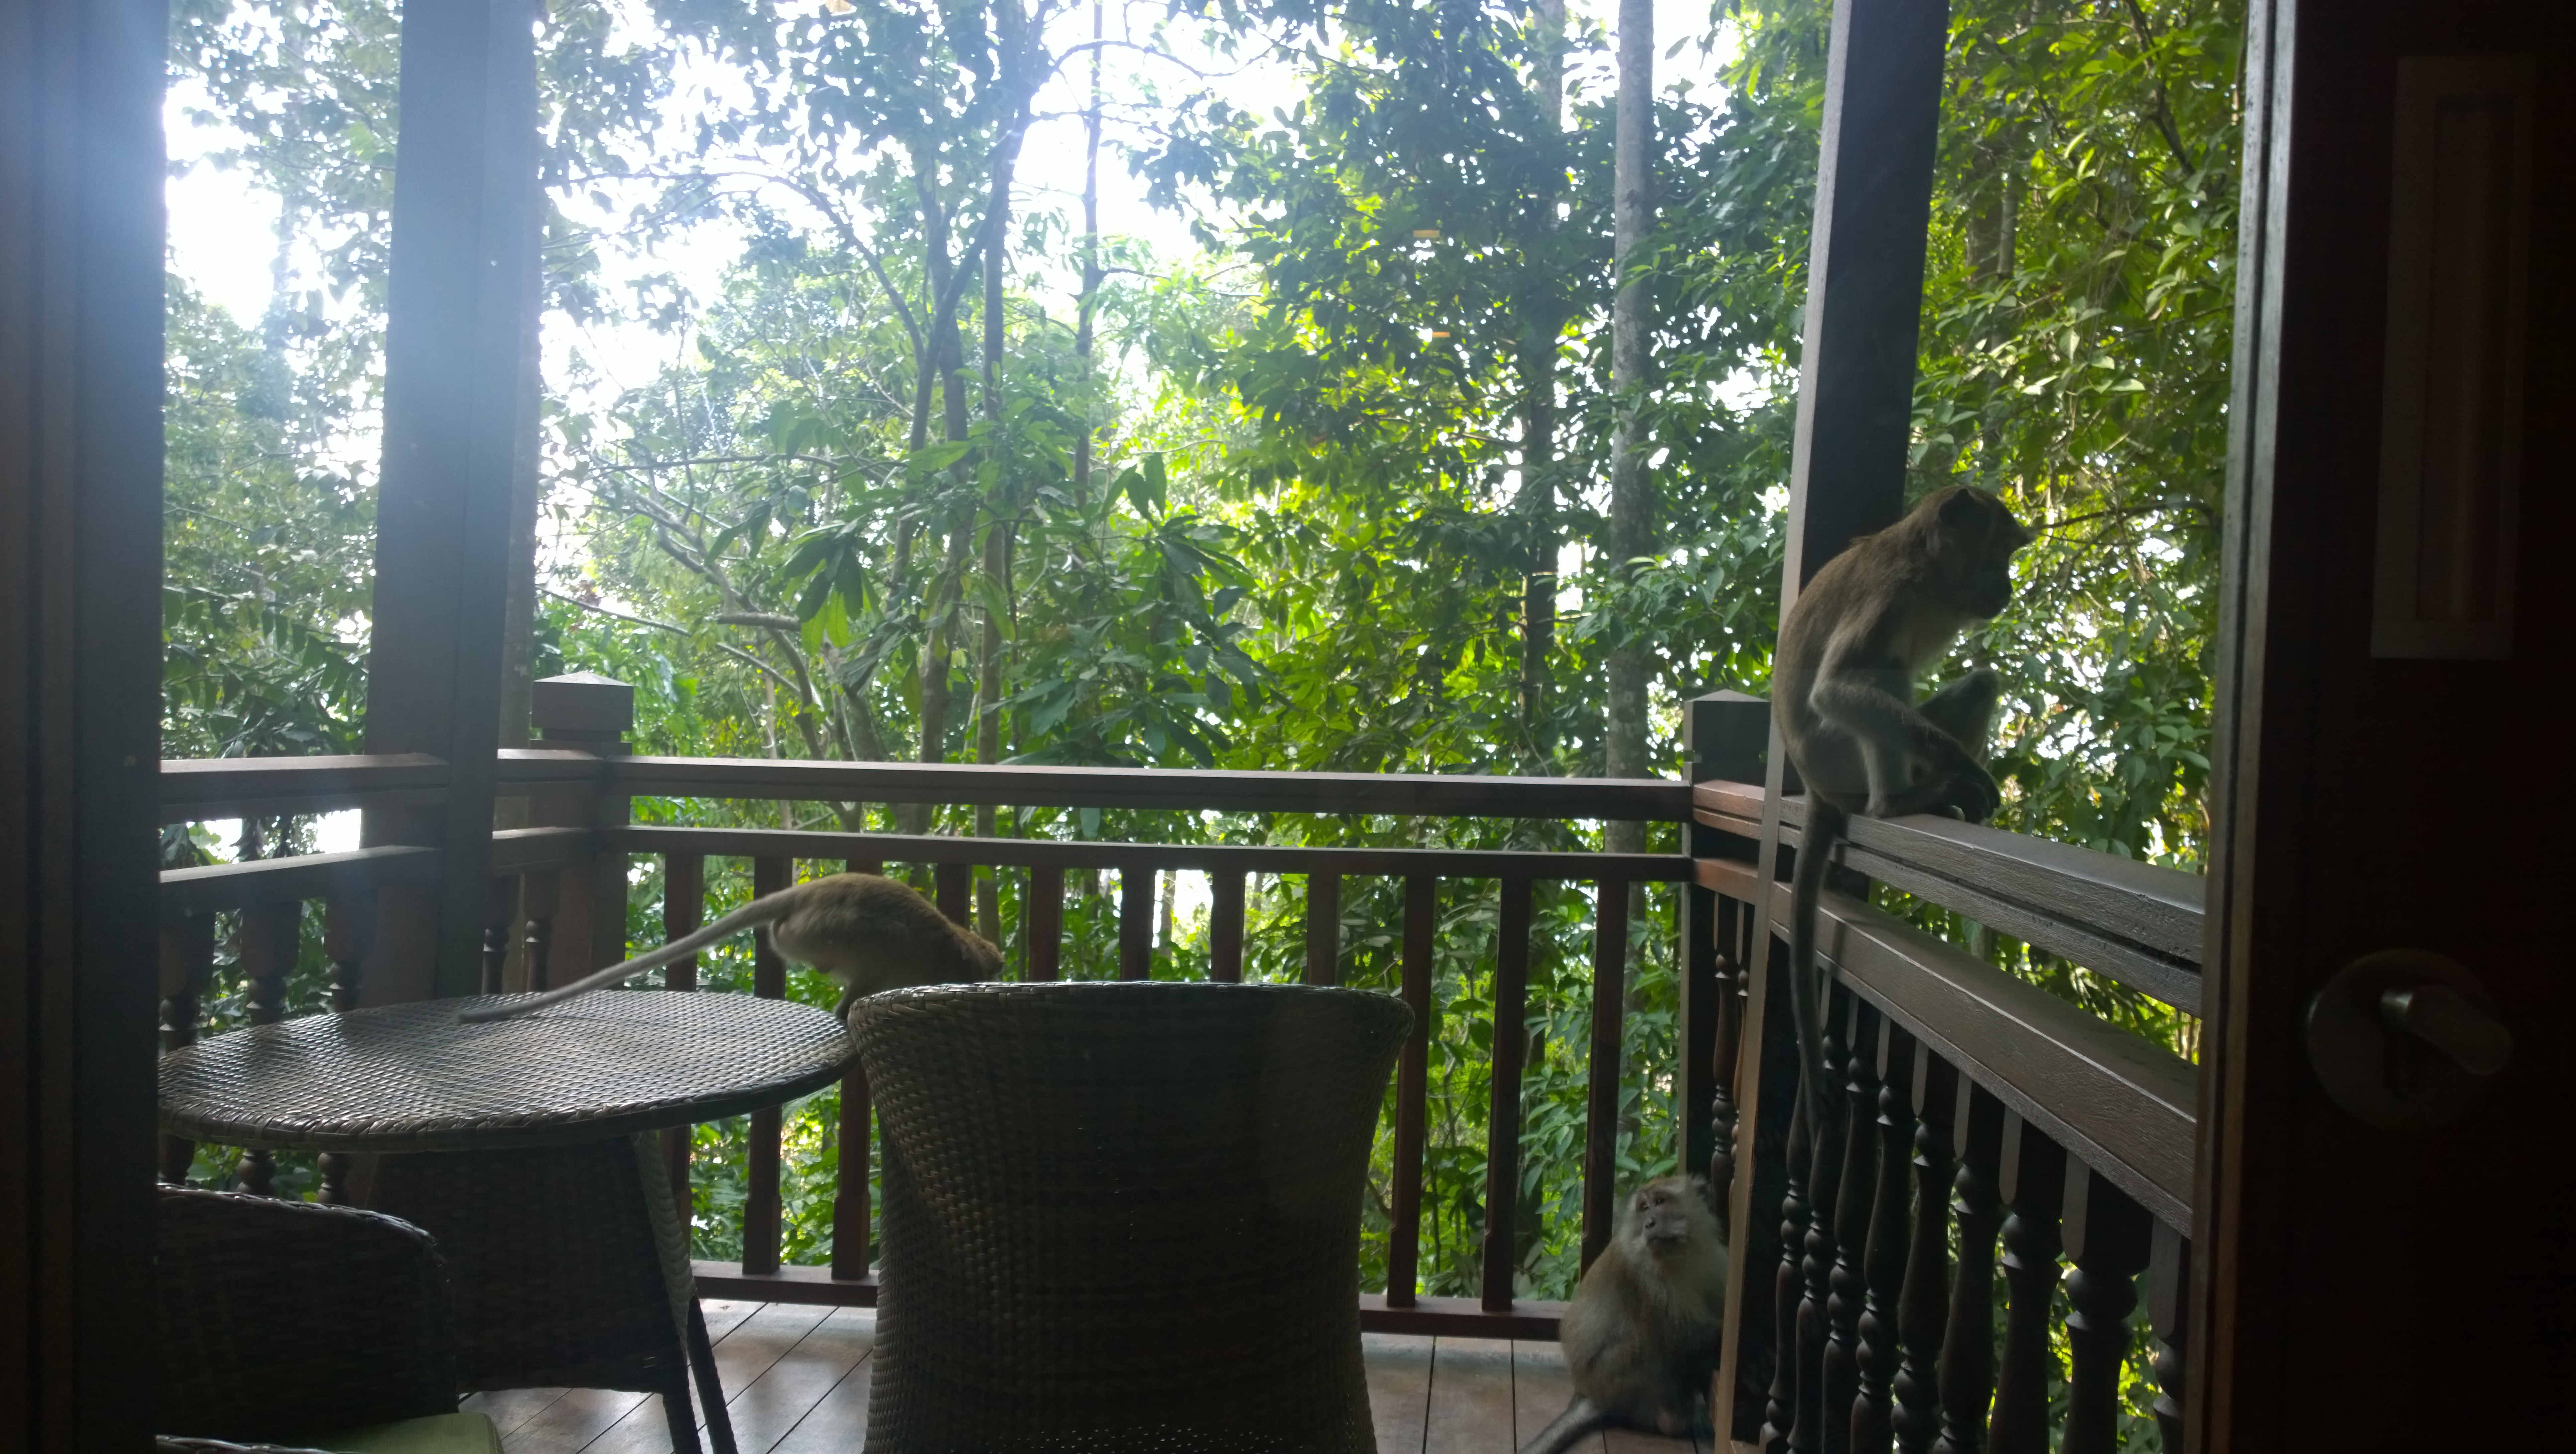 Macaques, one of many types of animals I spotted from my hotel room windows in Langkawi, Malaysia